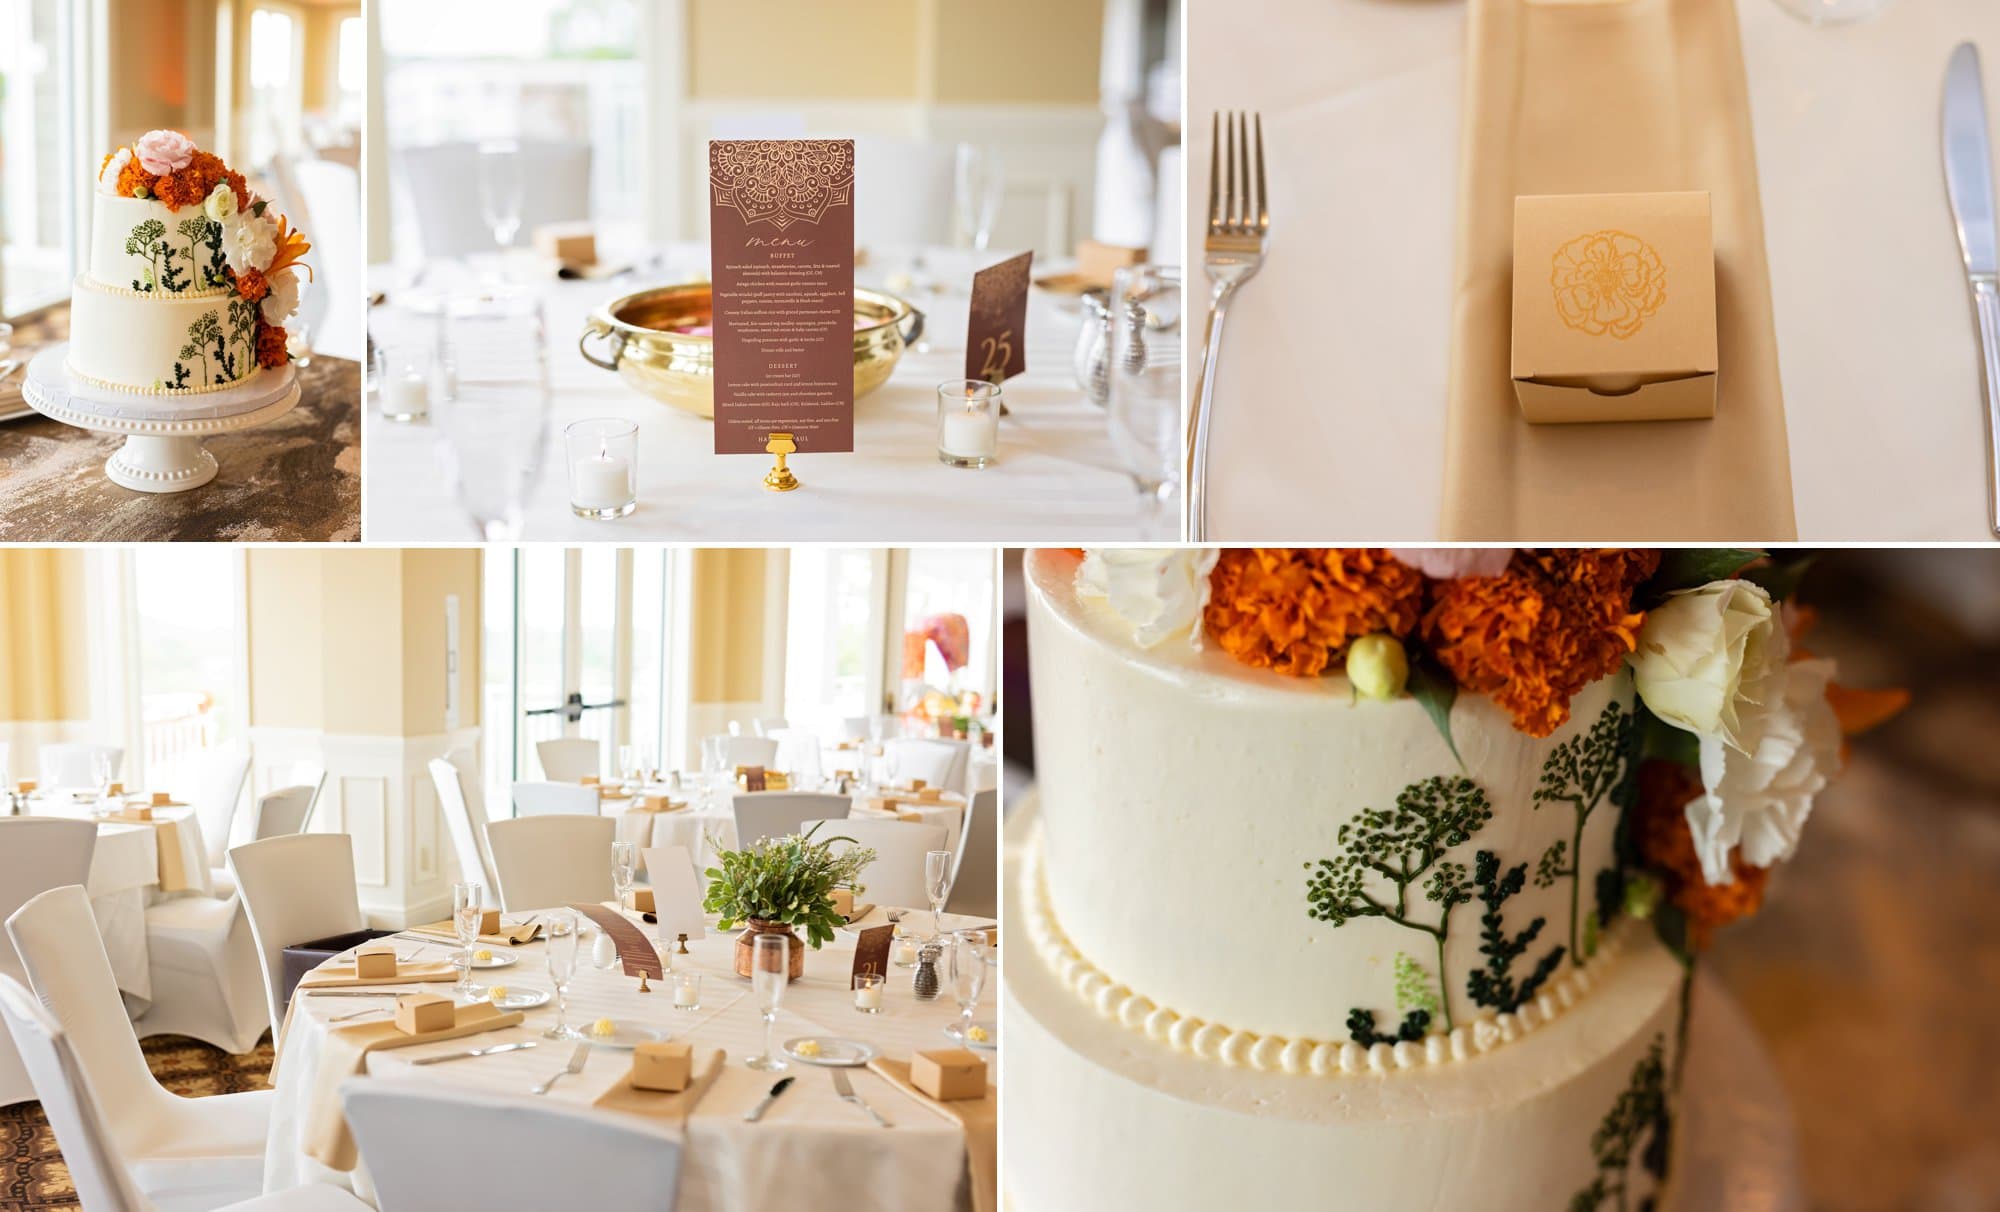 A collage of white, orange and cream wedding reception decor at Glenn Oaks Country Club in Des Monies, IA.